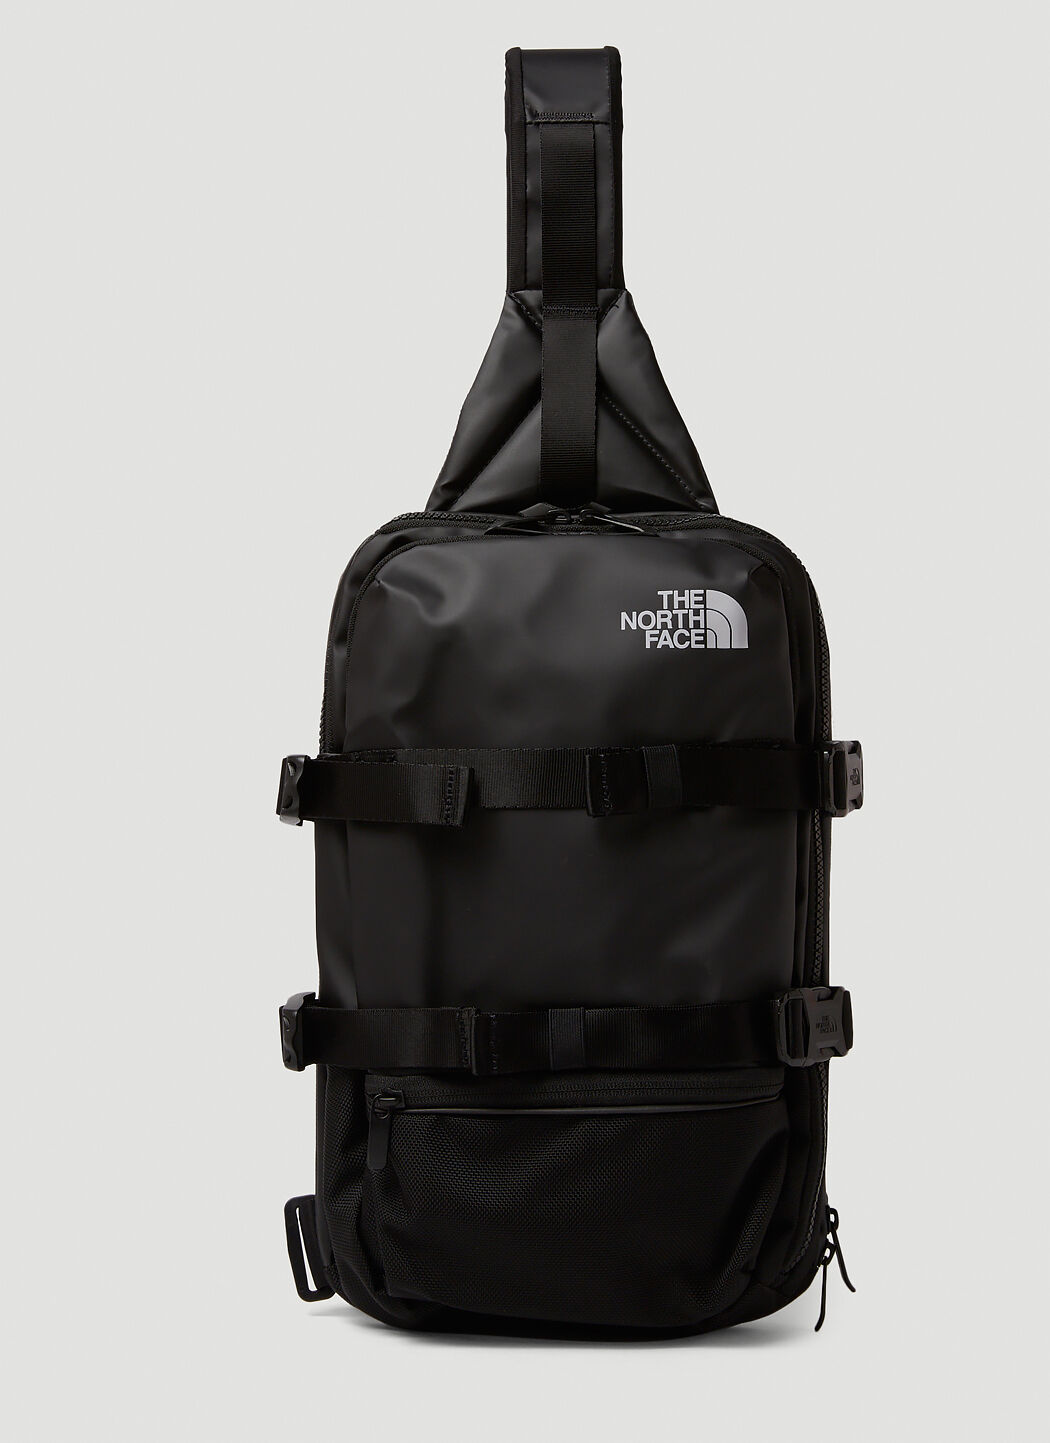 The North Face Field Crossbody Bag | Urban Outfitters | Bags, Crossbody bag,  Clothes for women